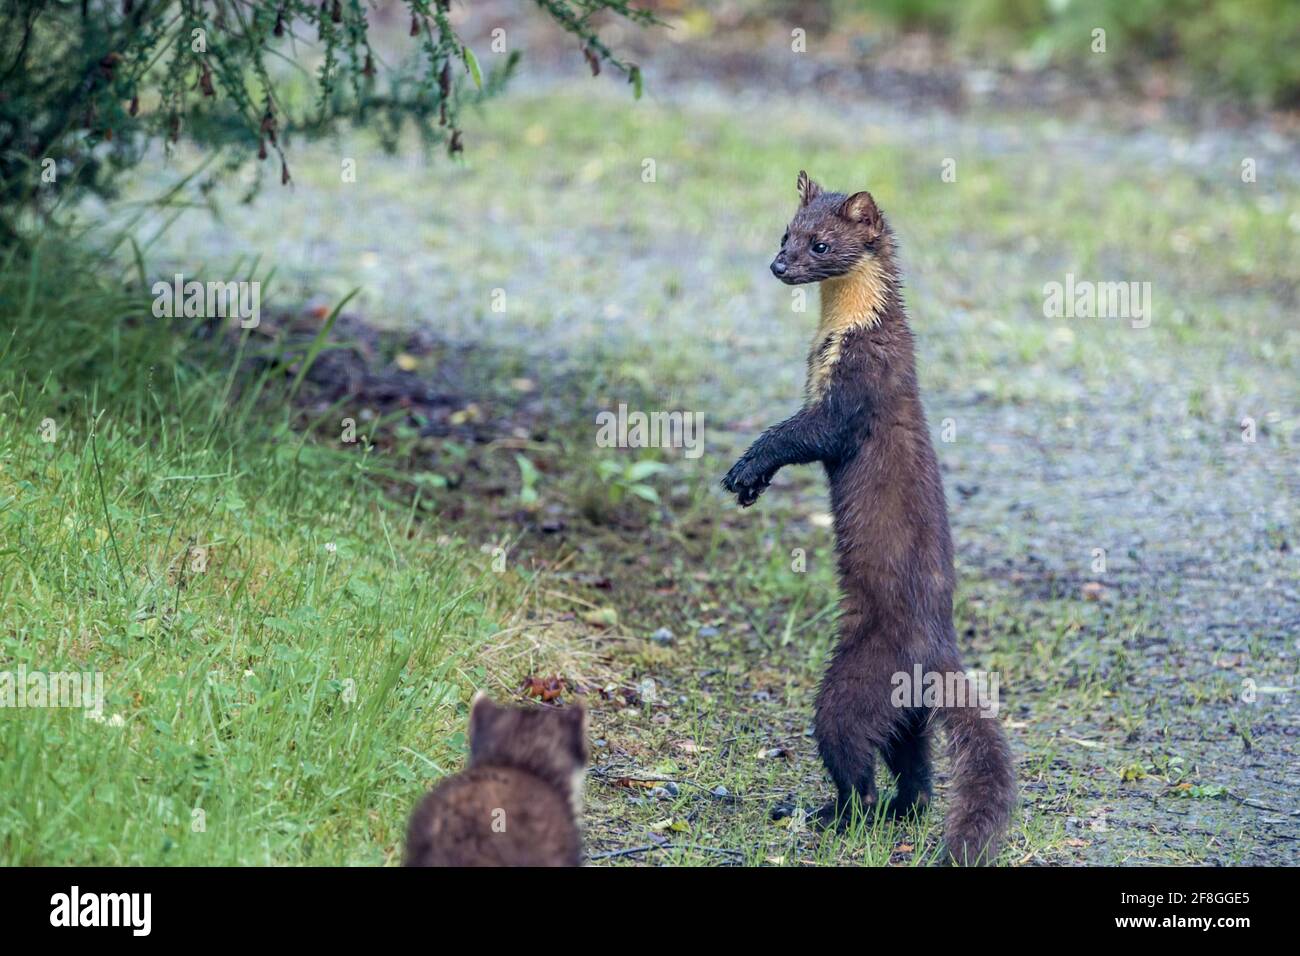 Juvenile Pine marten Martes martes standing on hind legs to get a better view in the Highlands of Scotland Stock Photo